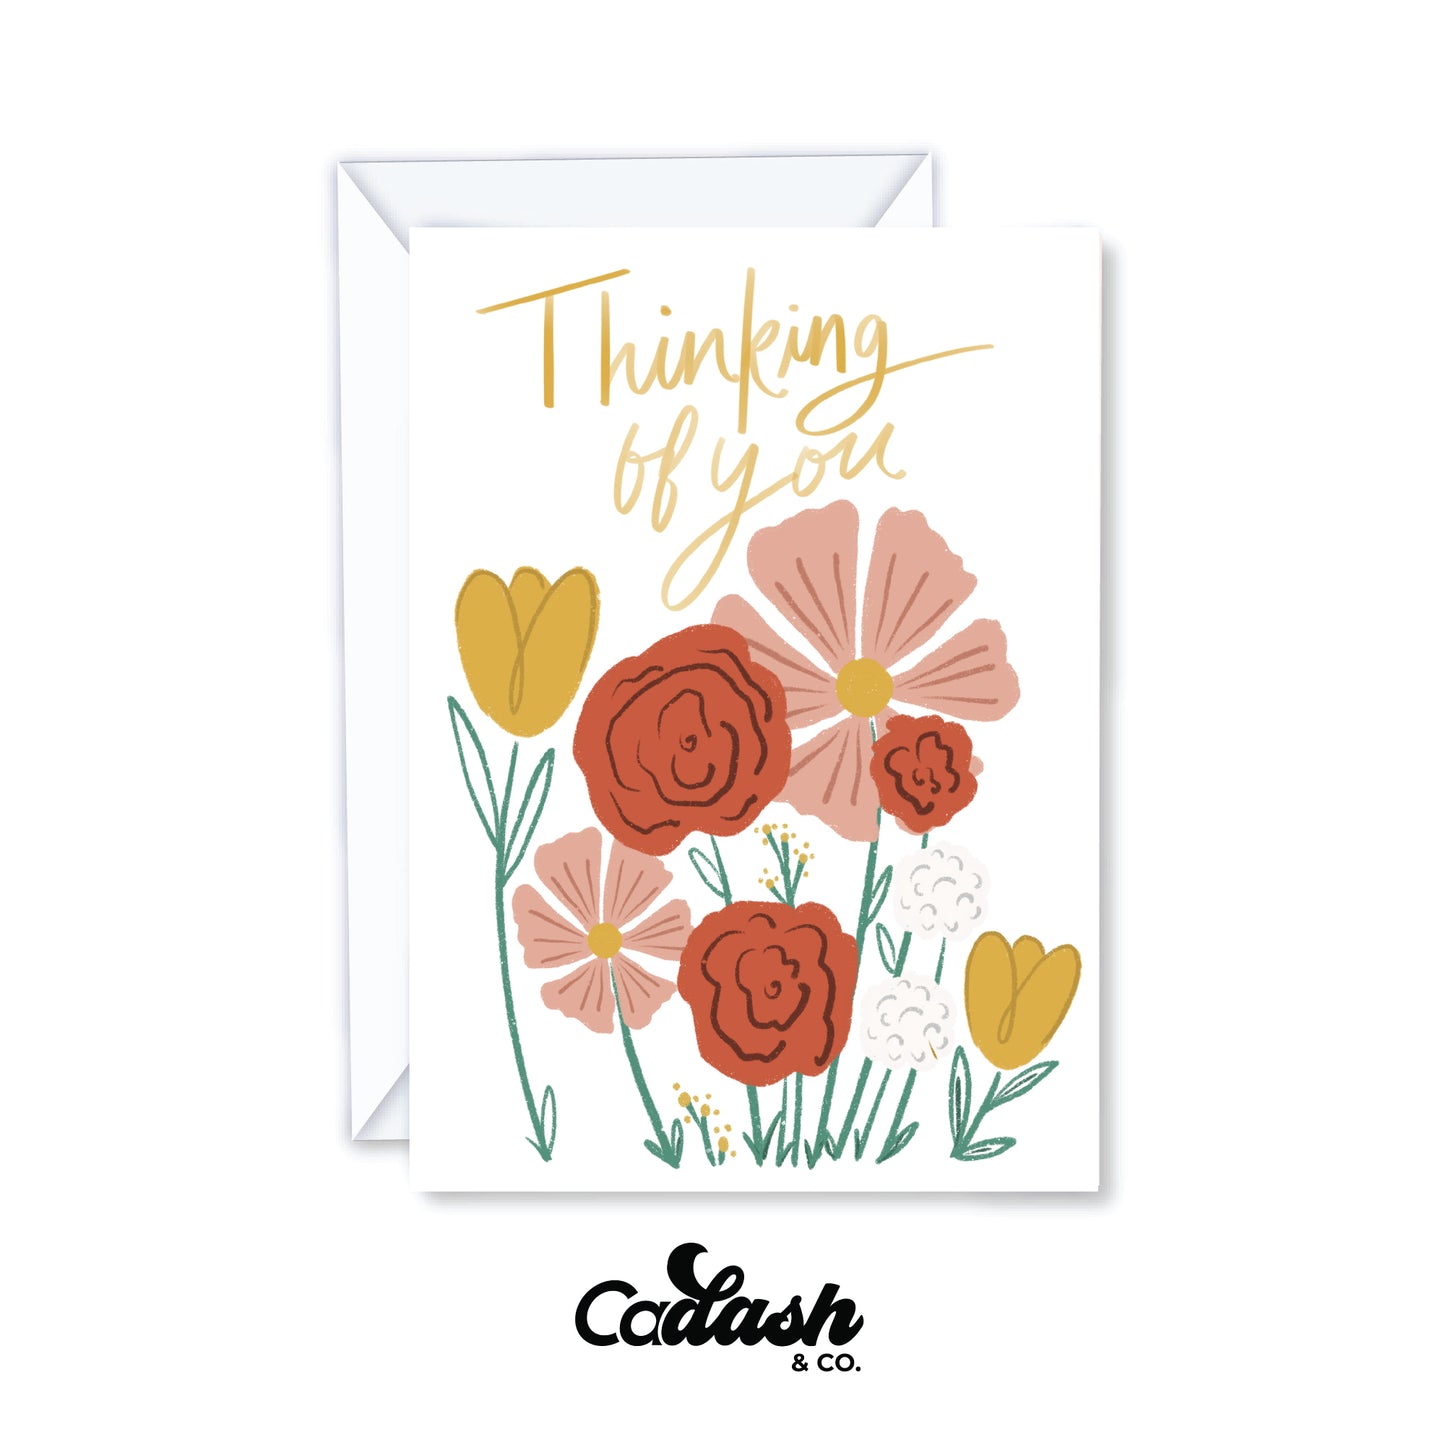 Thinking of you Greeting card